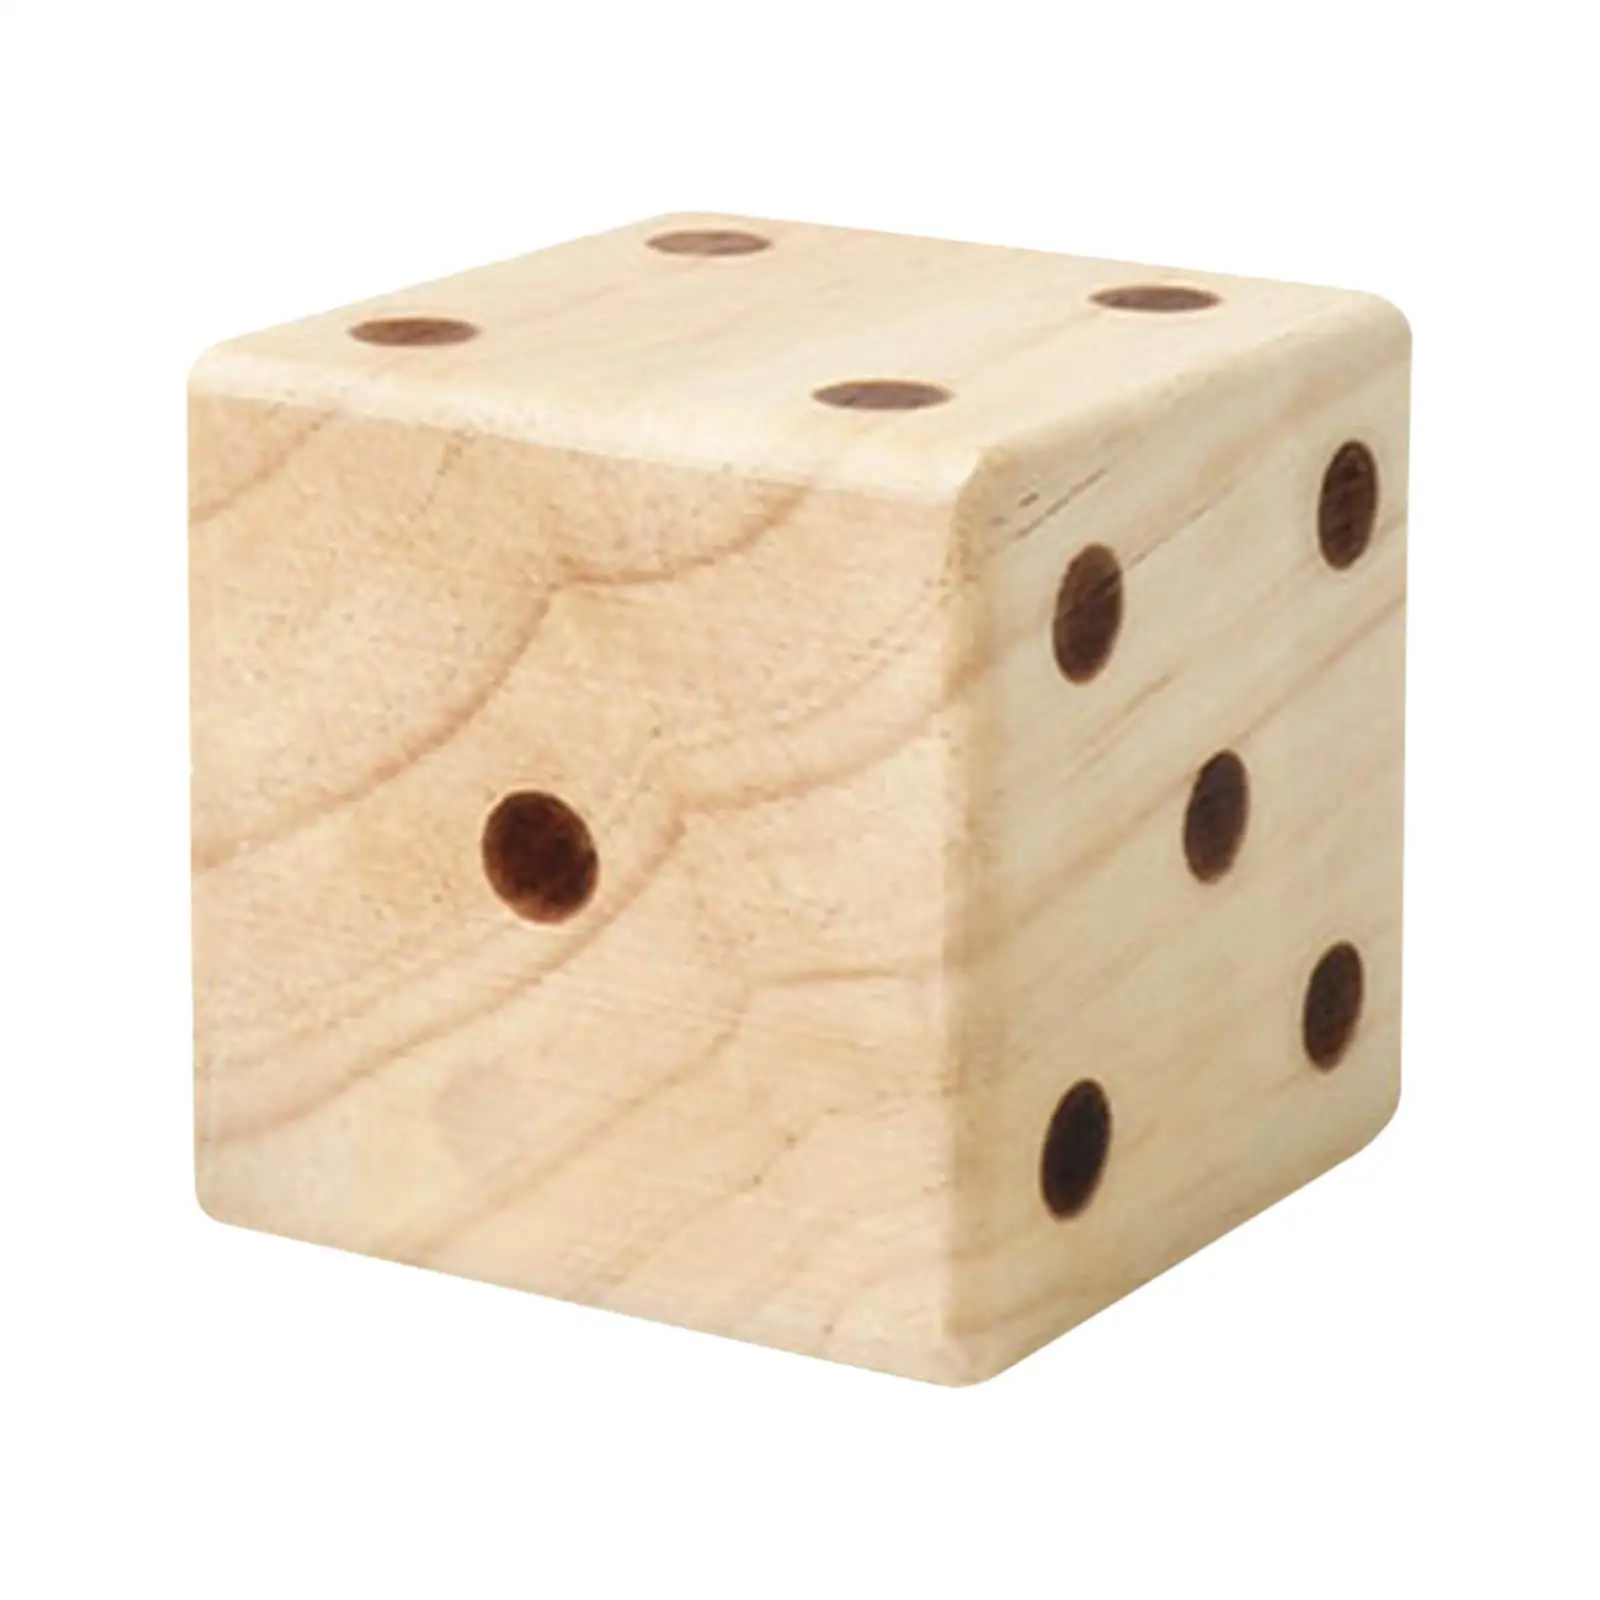 Large Wooden Yard Dice 7cm Lightweight for Game Sports Equipment Lawn Kids Family